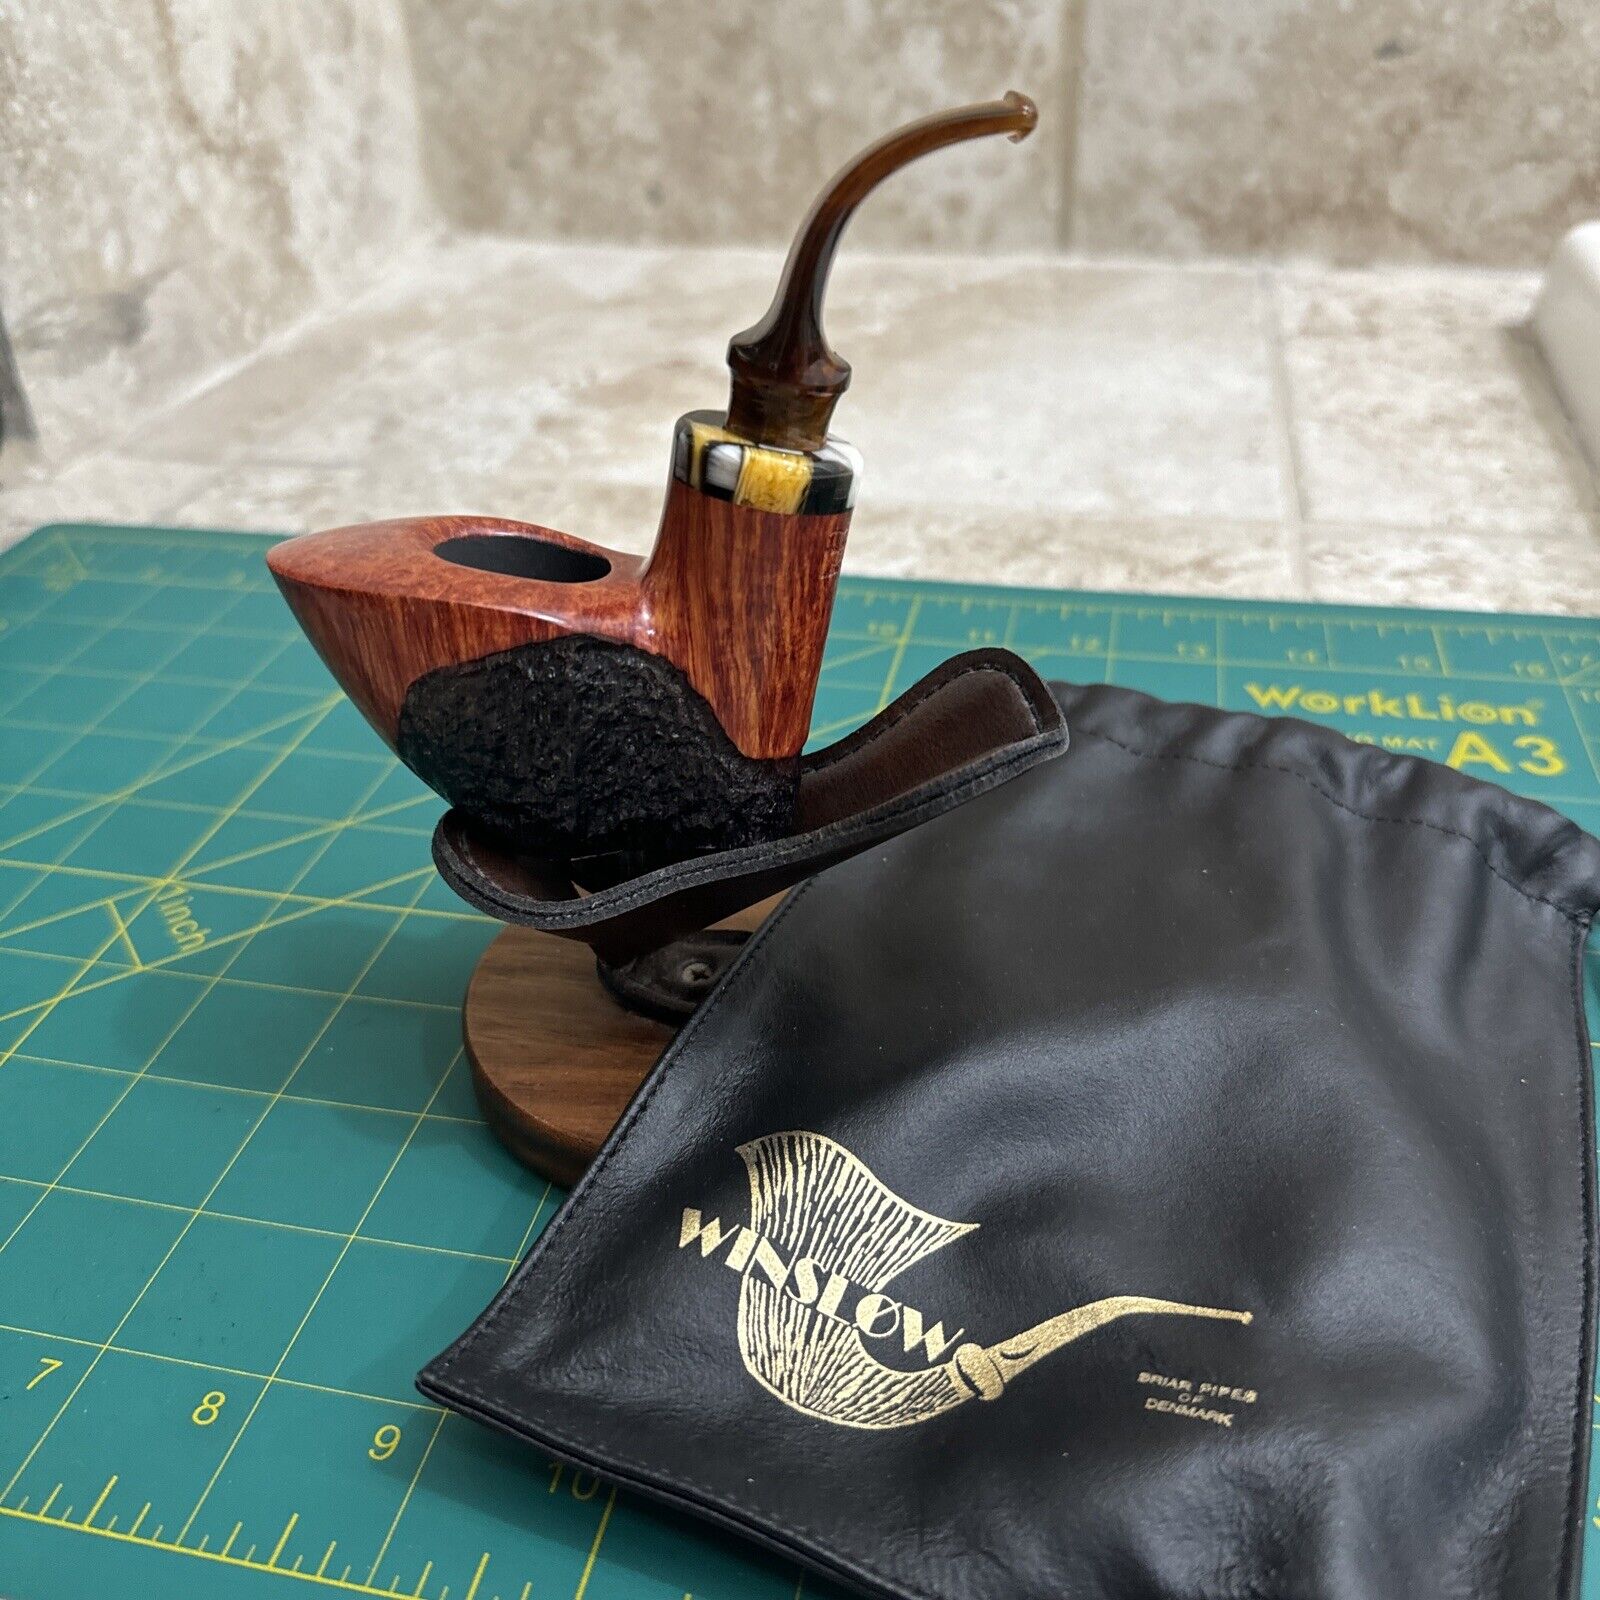 Winslow Tobacco Pipe Grade E Absolutely Stunning Sitter Brand New 9mm